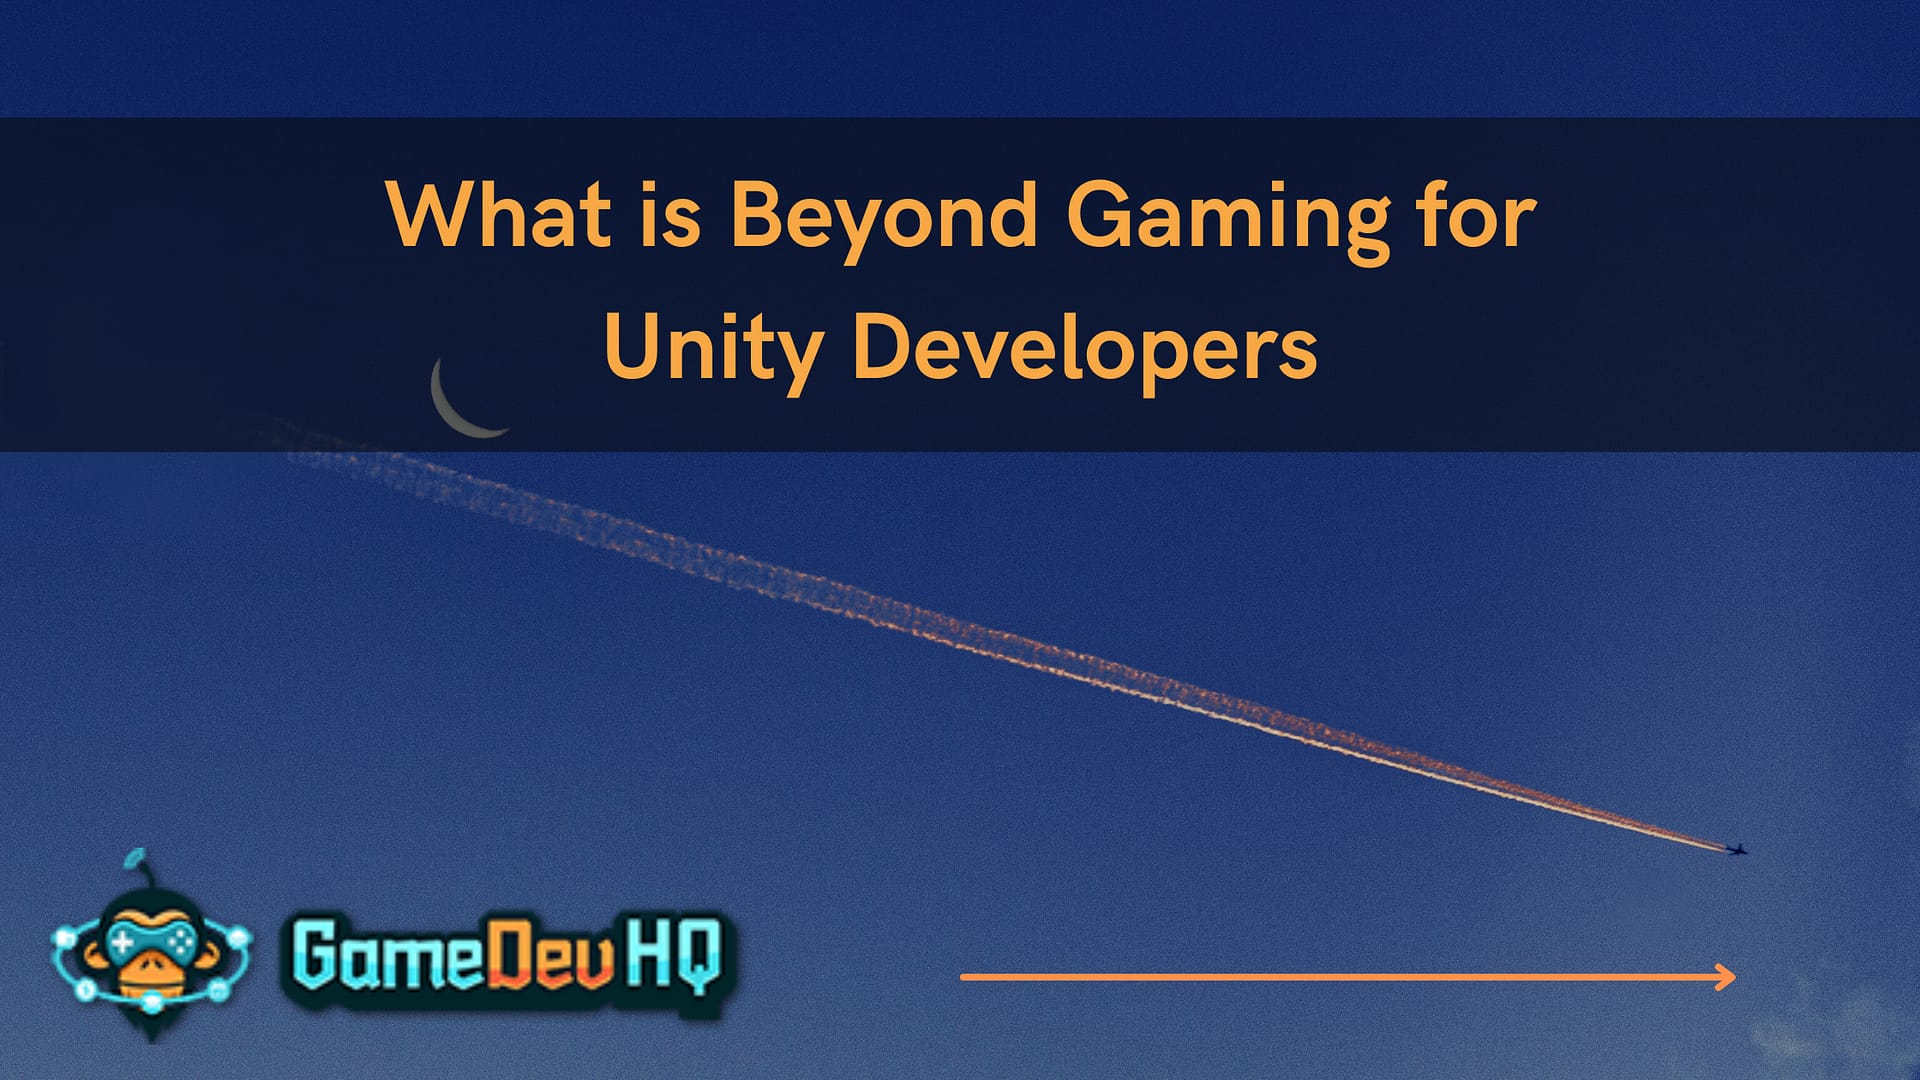 What Is Beyond Gaming for Unity Developers?